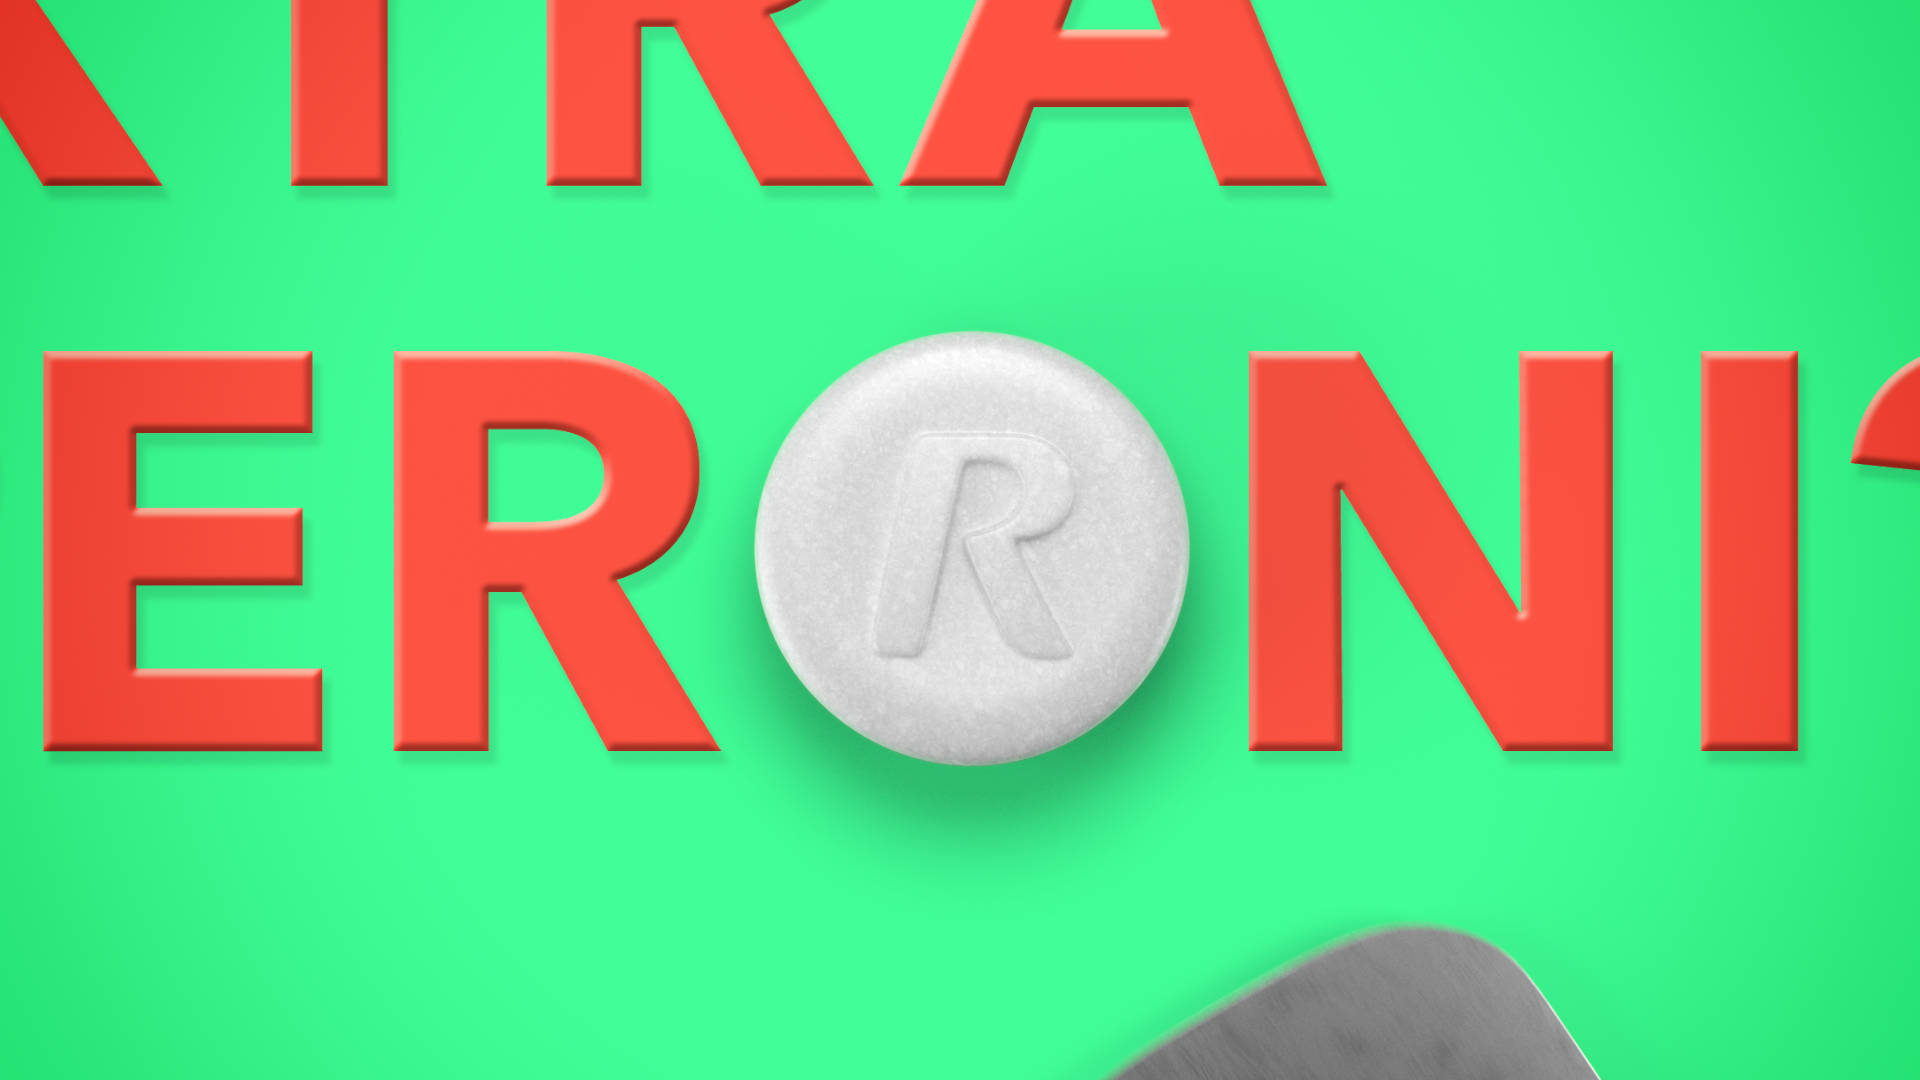 A Rolaids tablet replacing a pizza on a green background.